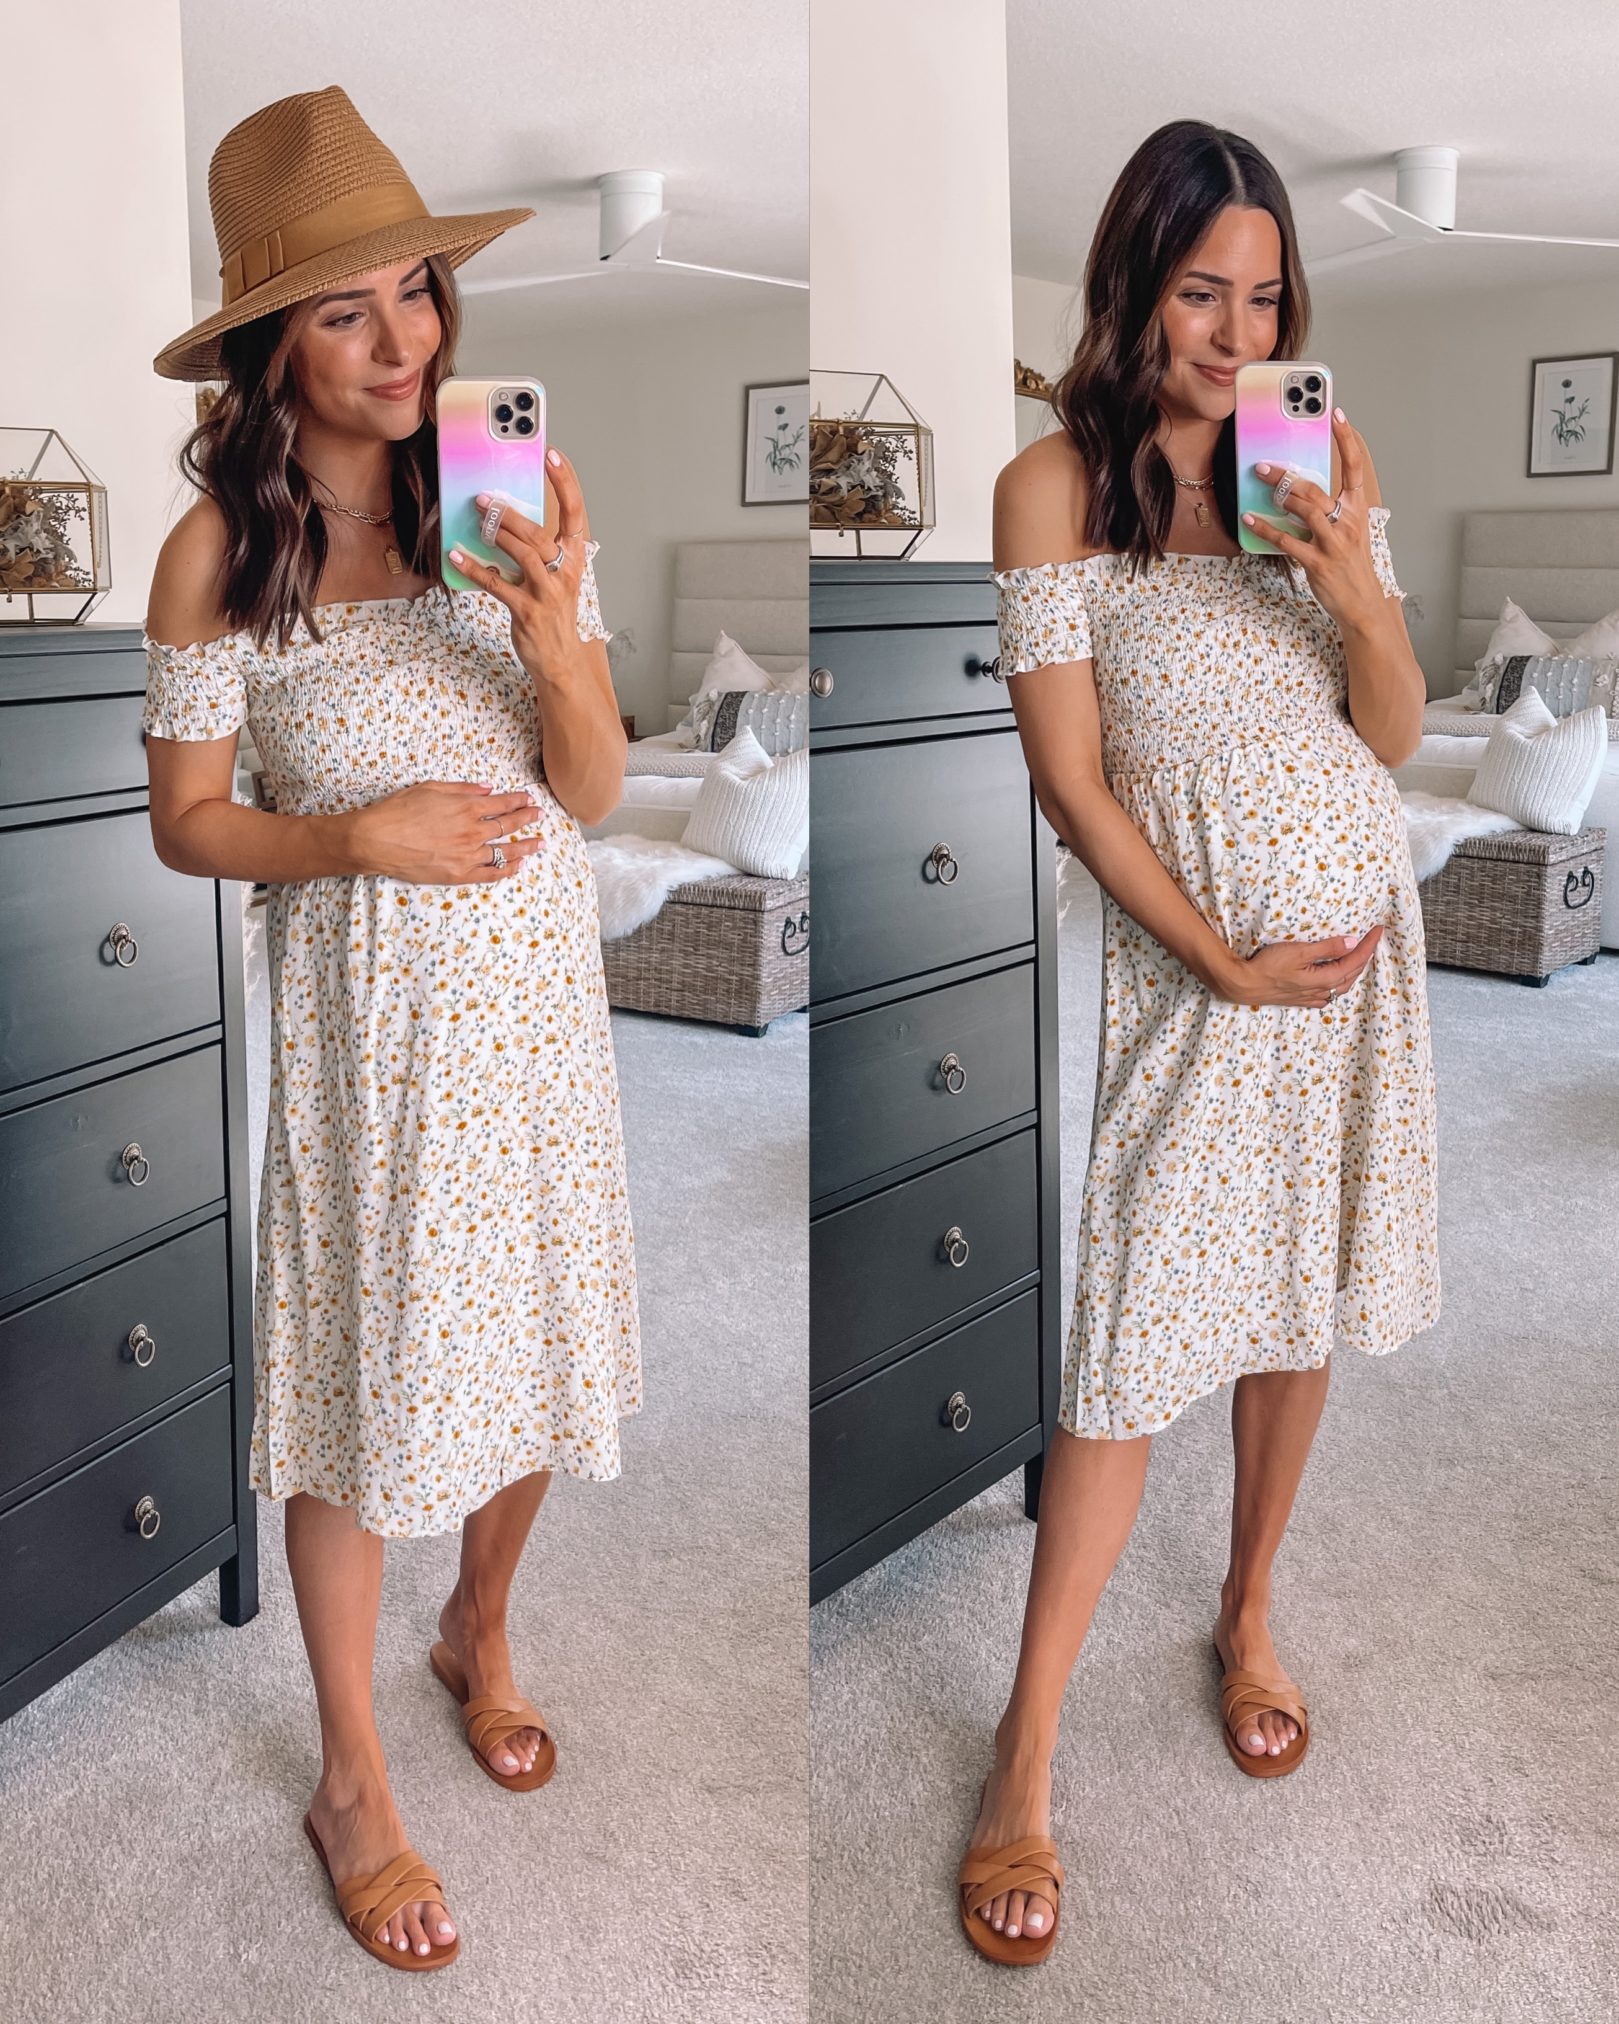 Viva Fashion: Forever 21 Launches Maternity Line: Love 21